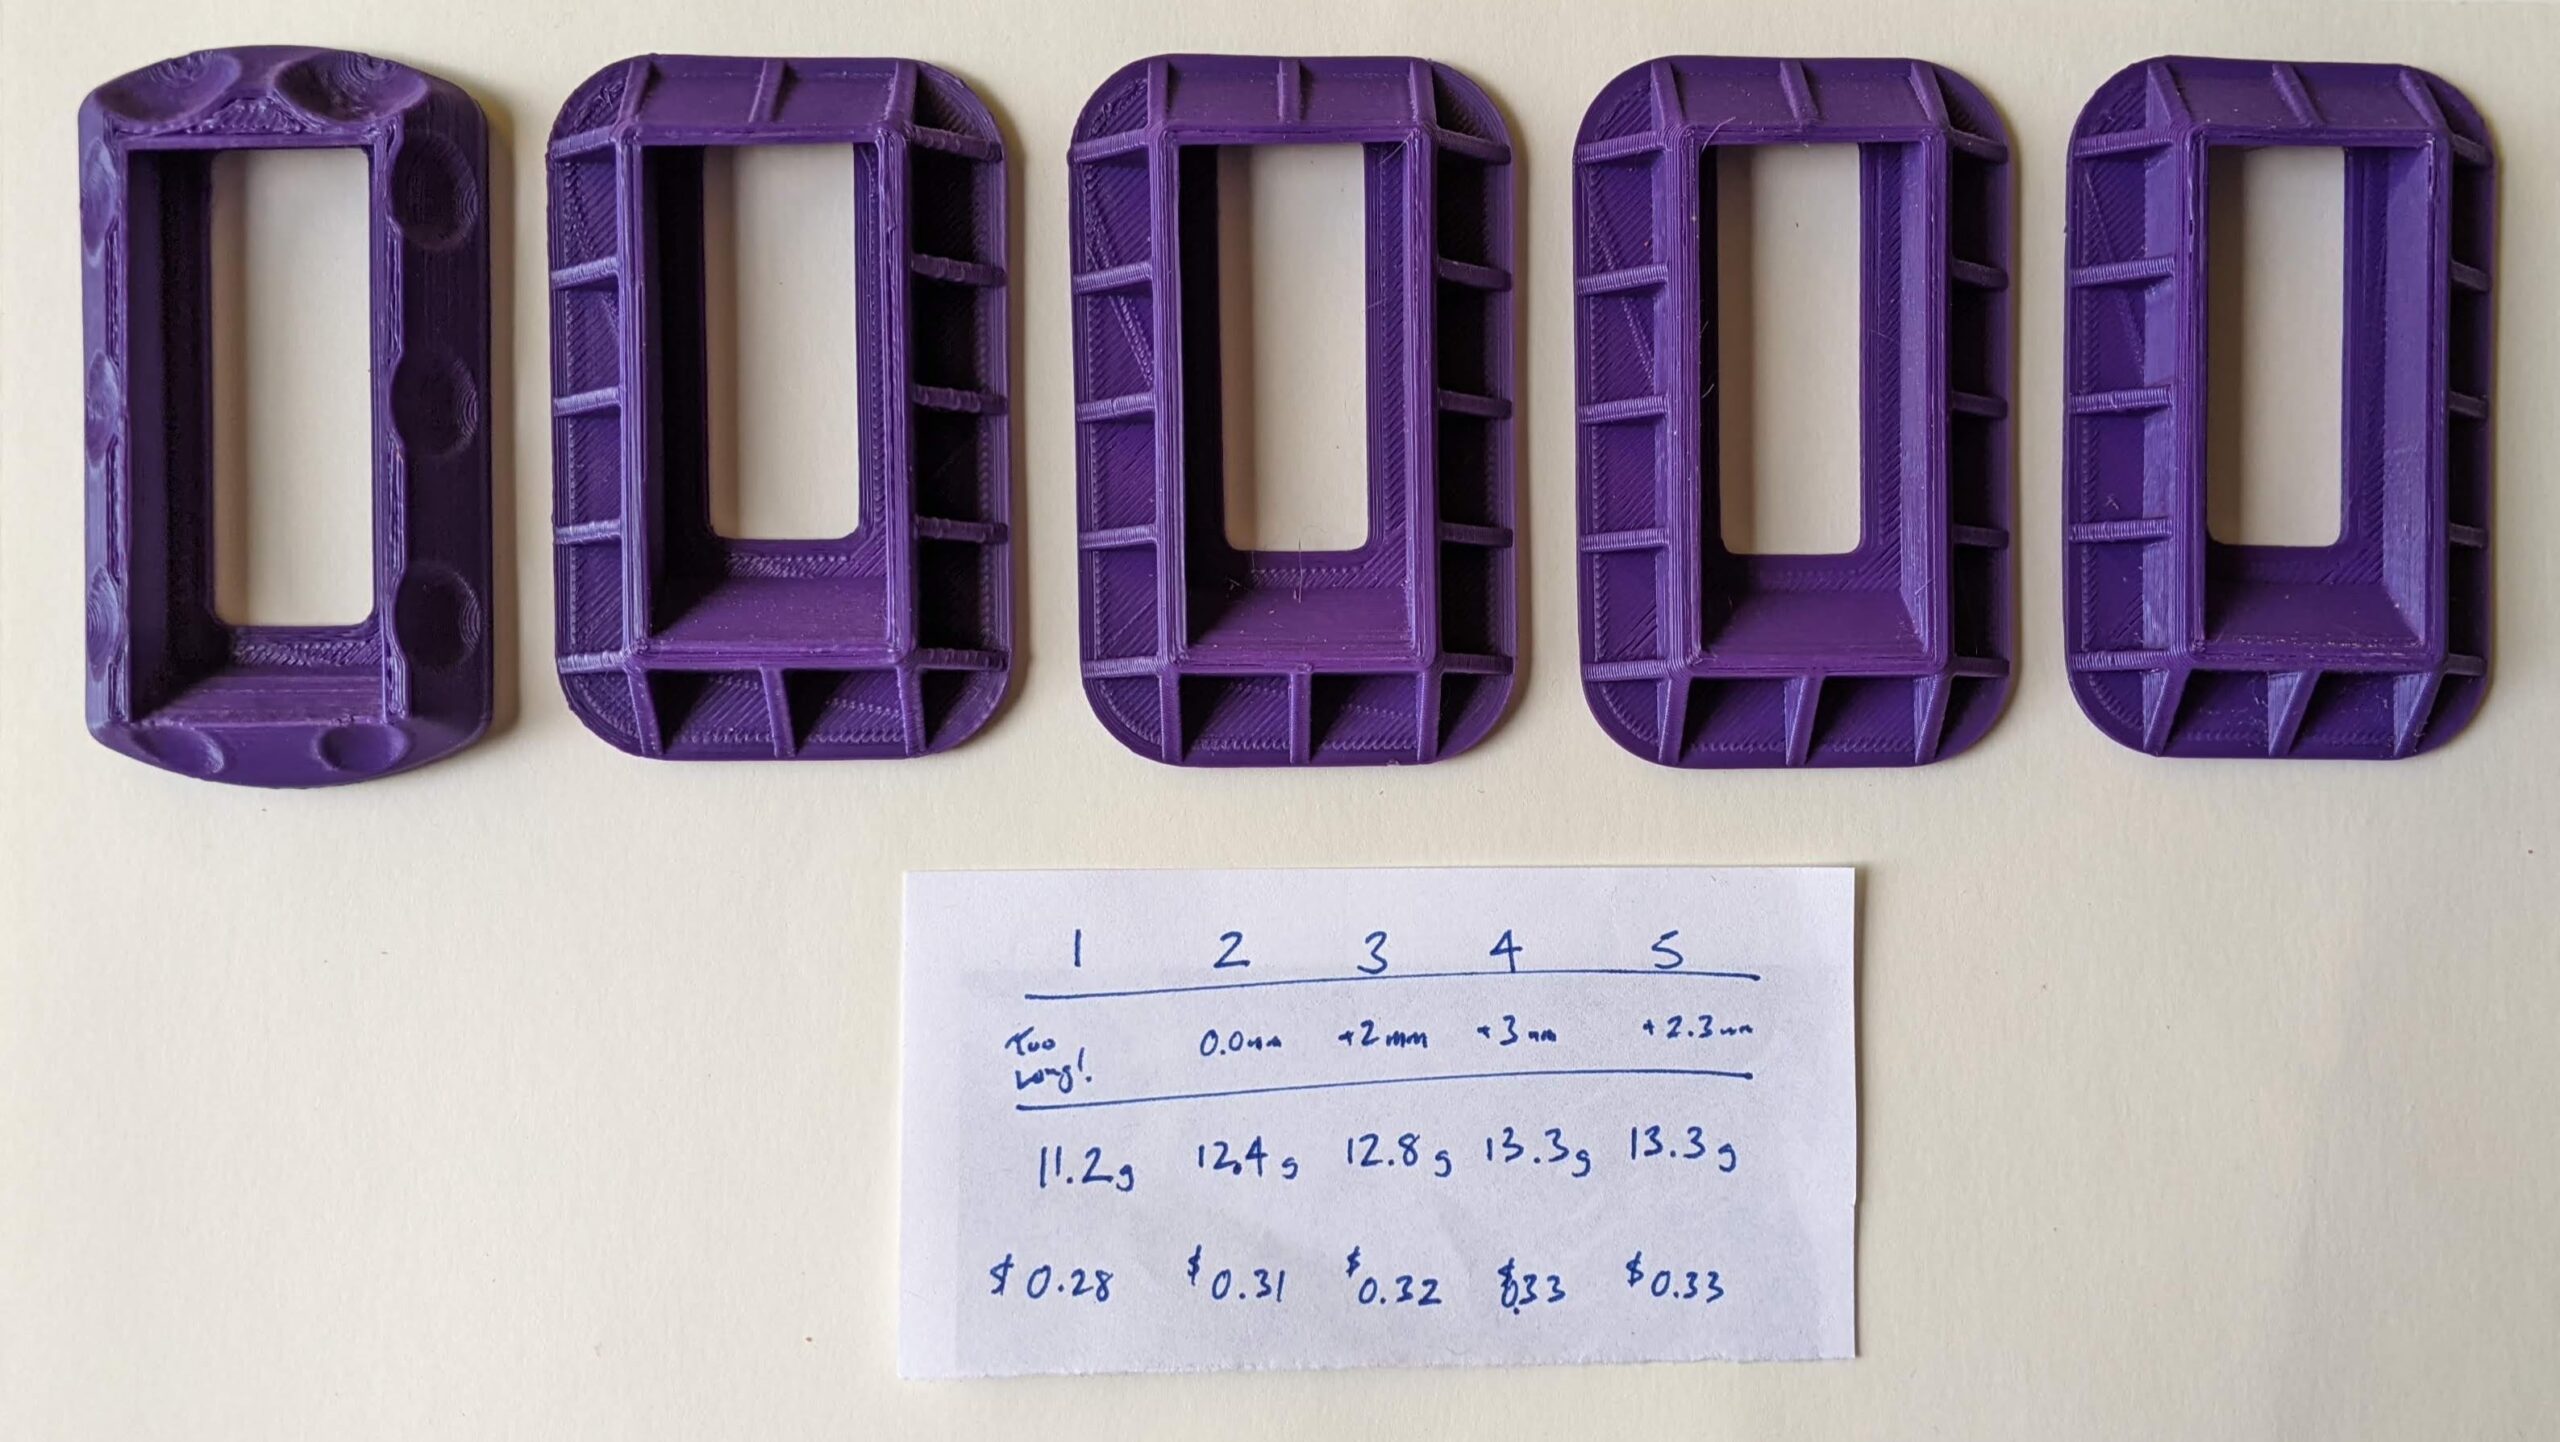 Eraser holders for carving, versions 1, 2, 3, 4, and 5